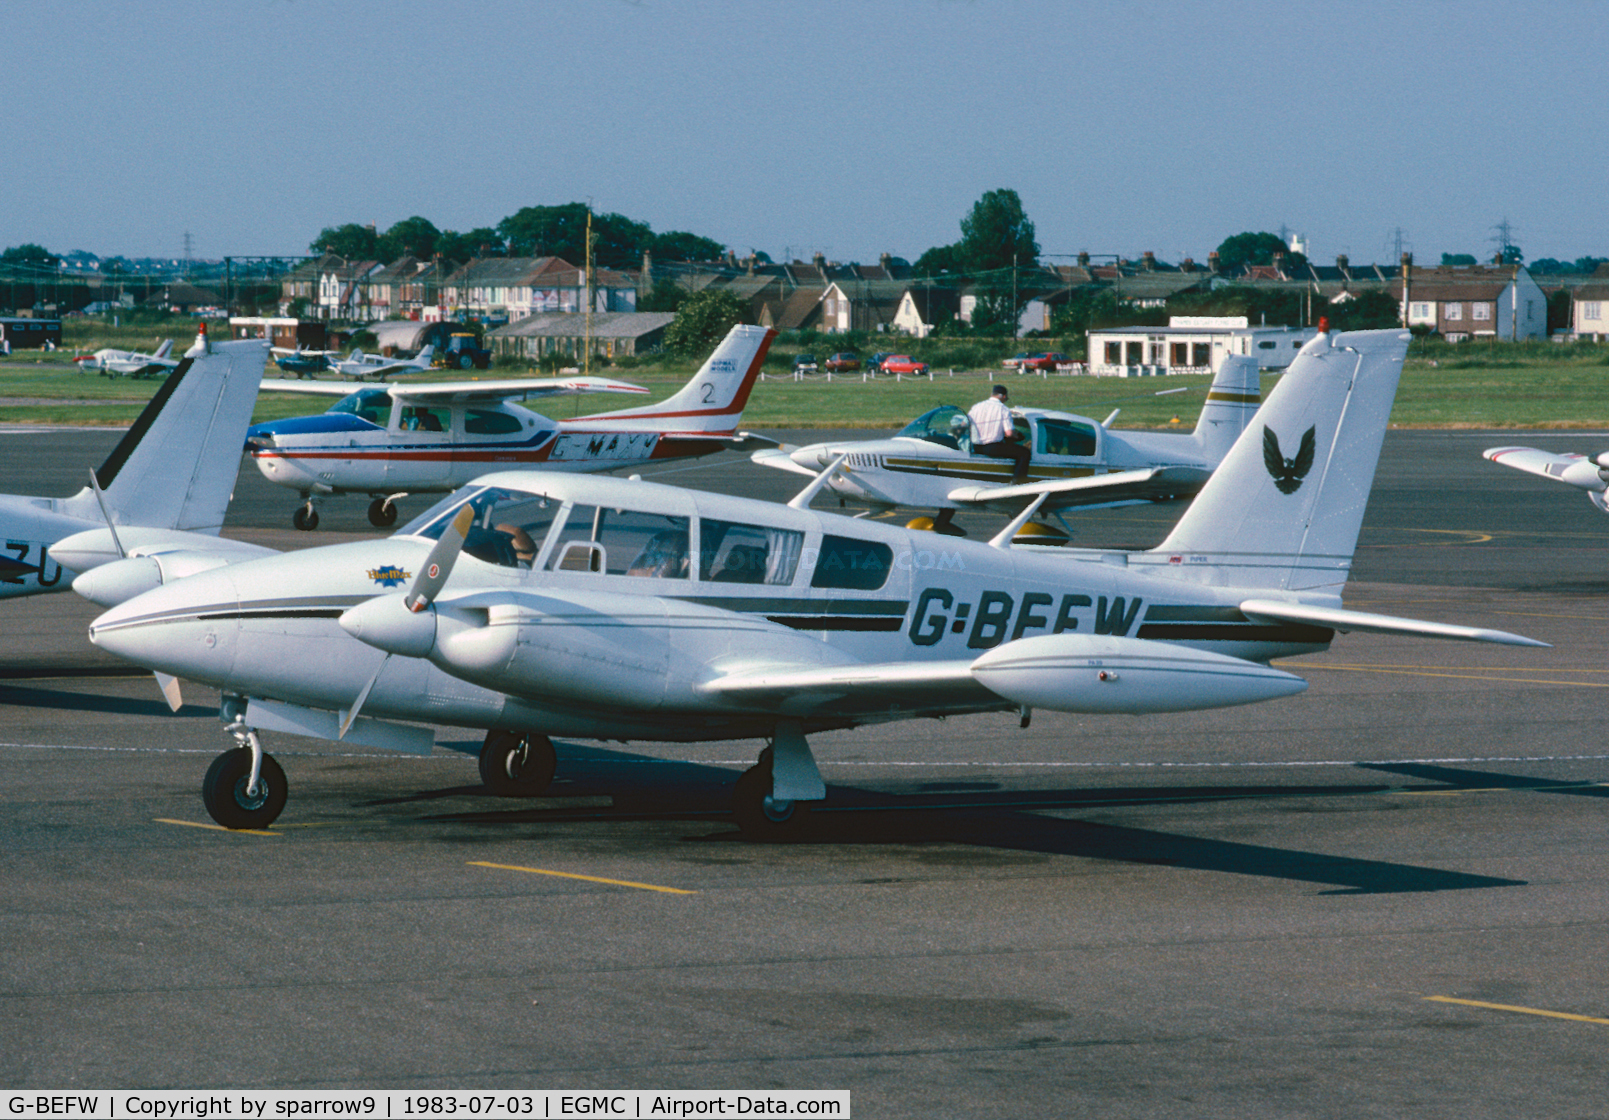 G-BEFW, 1971 Piper PA-39 Twin Comanche C/R C/N 39-91, Seen on our stopp-over at Southend. Scanned from a slide.